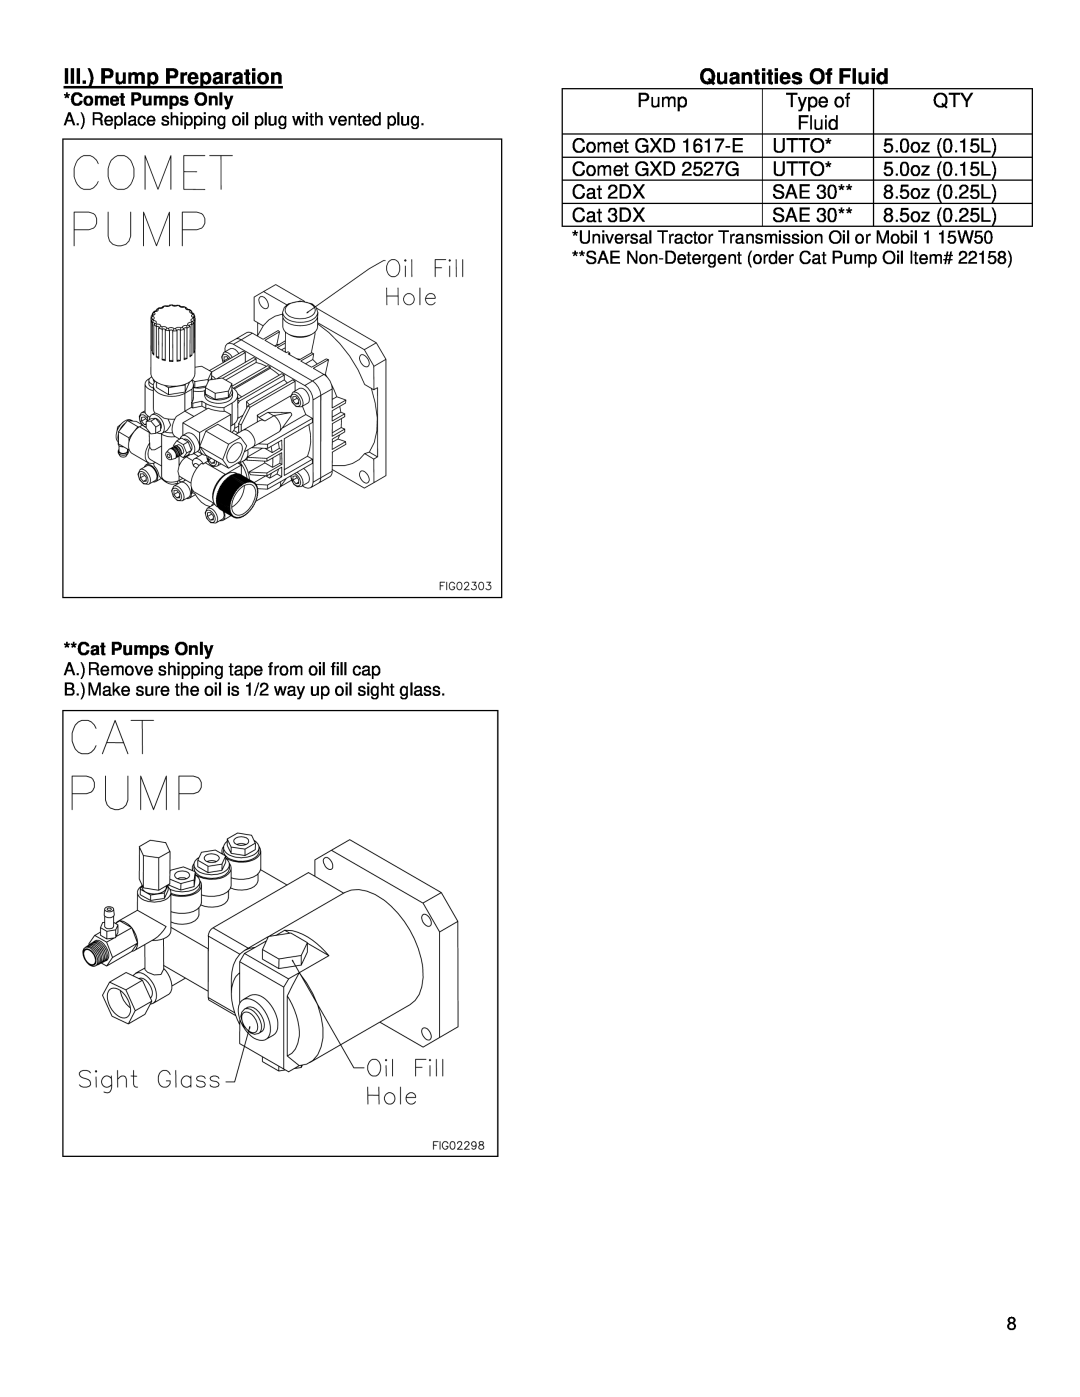 North Star M157305G specifications III. Pump Preparation, Quantities Of Fluid 